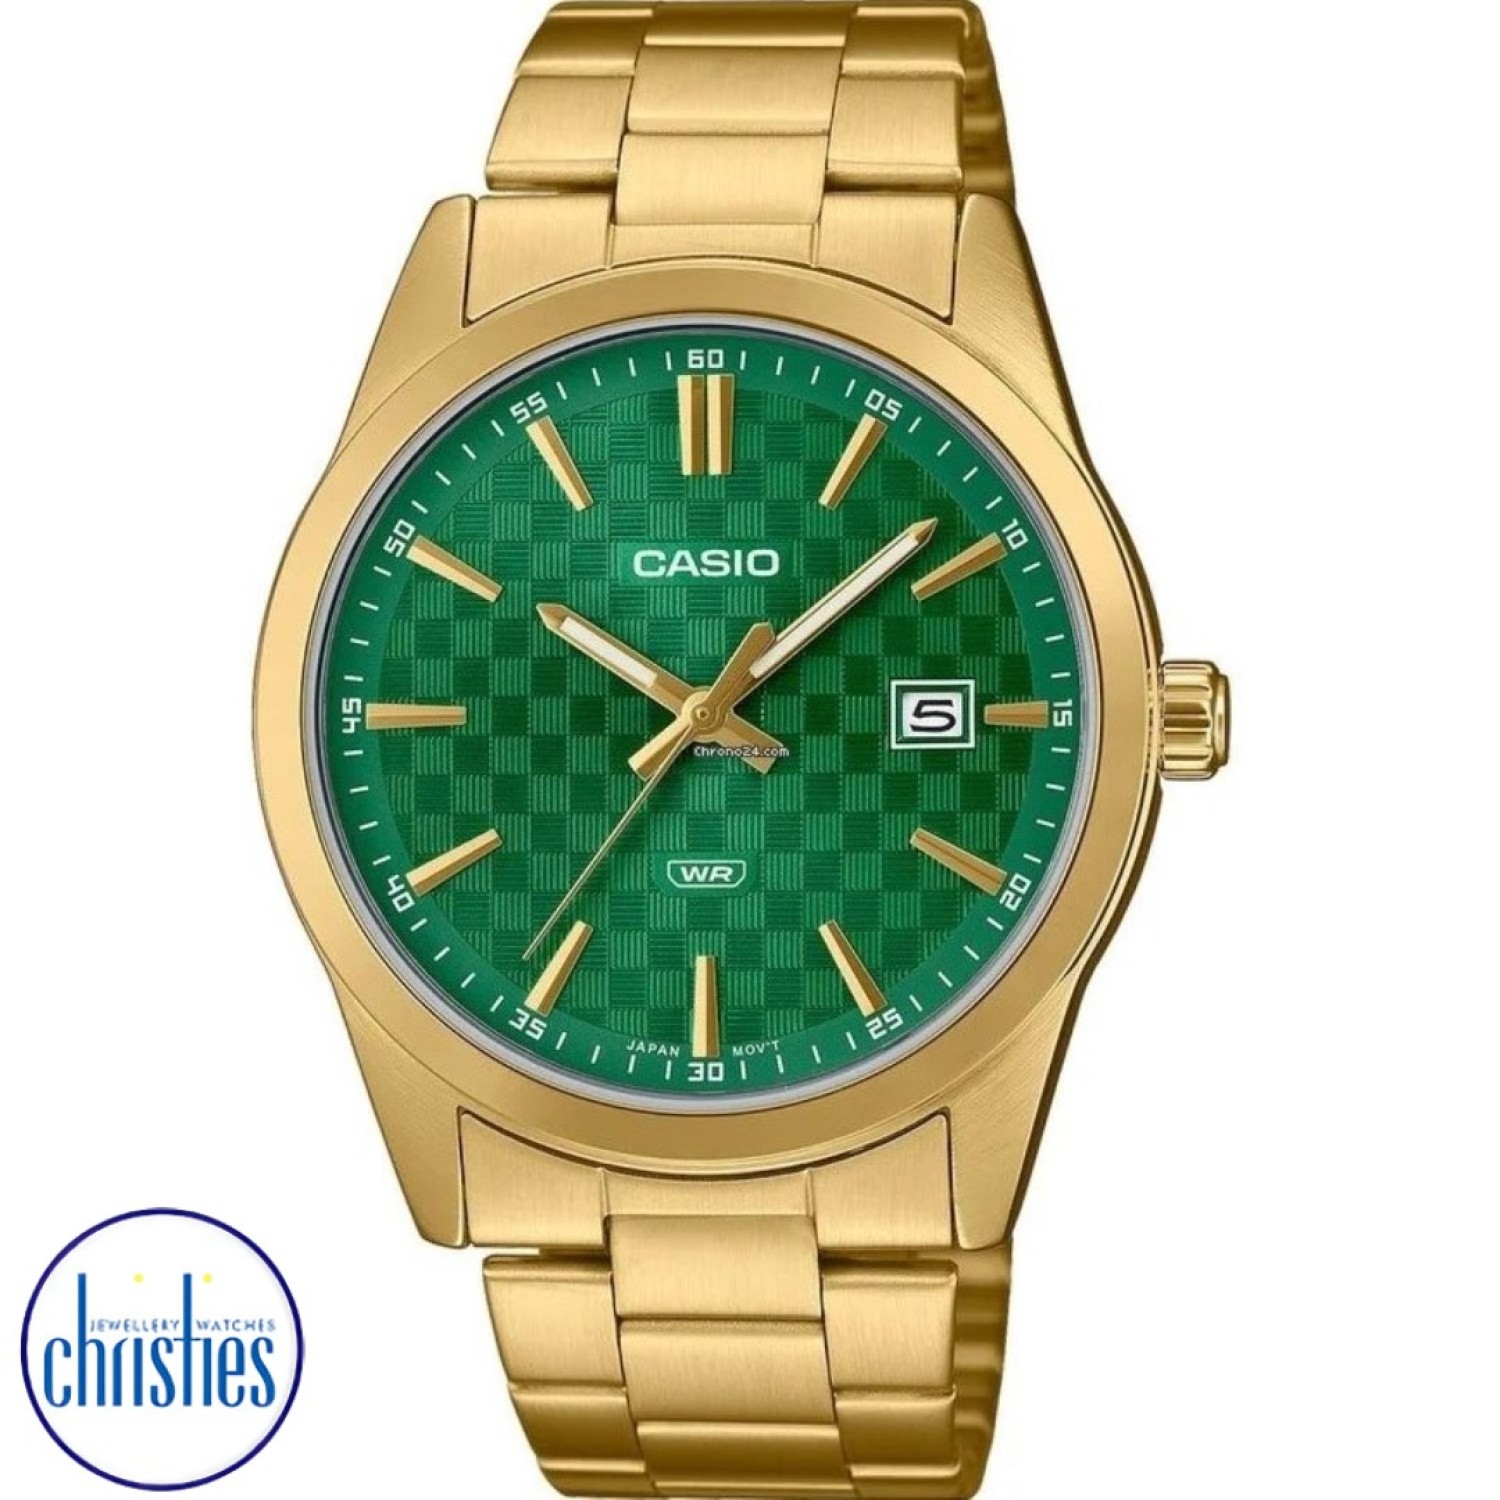 MTPVD03G-3A Casio Green Dial Watch MTPVD03G-3A Casio New Zealand and Auckland - Free Delivery - Afterpay, Laybuy and Zip  the easy way to pay - Cheap Casio Watches Auckland